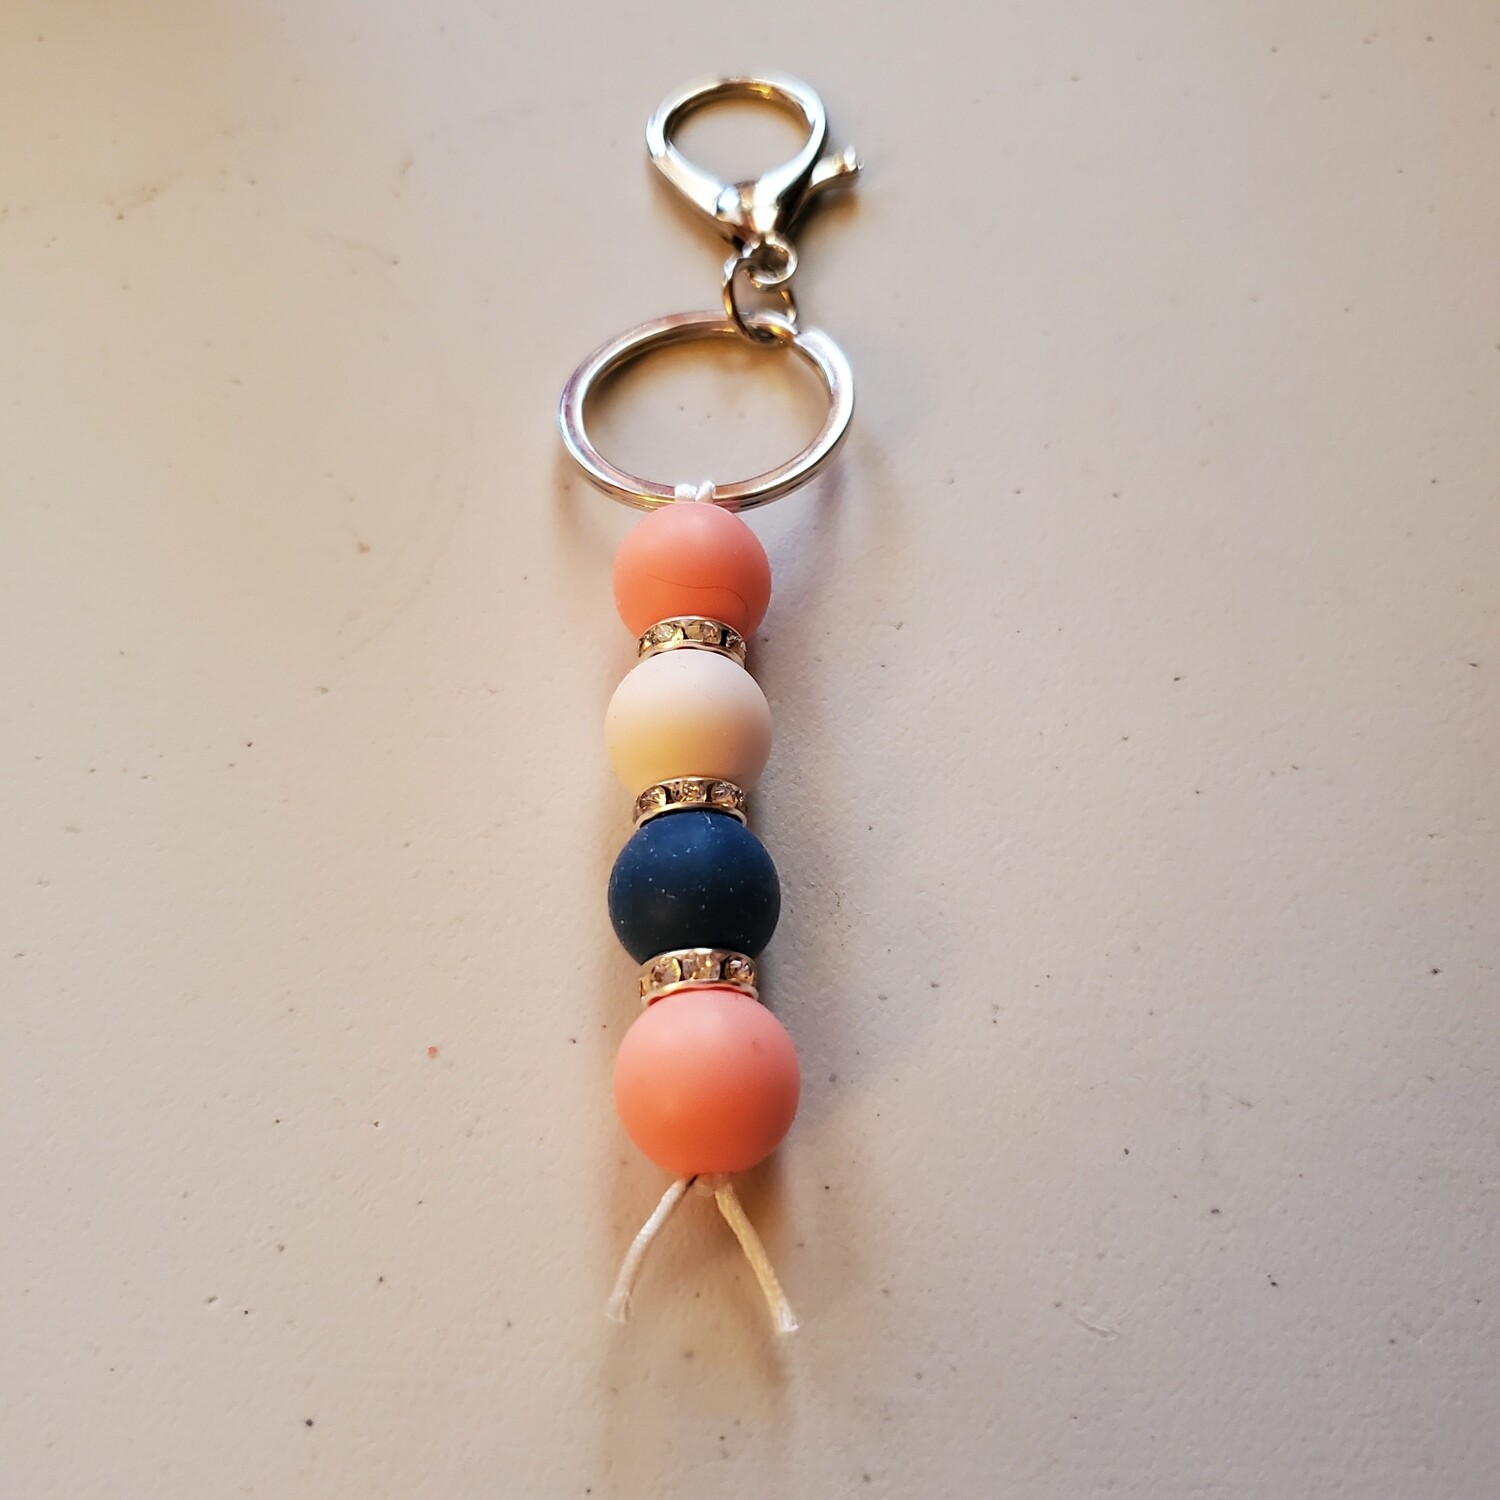 Key chain - Blue and salmon